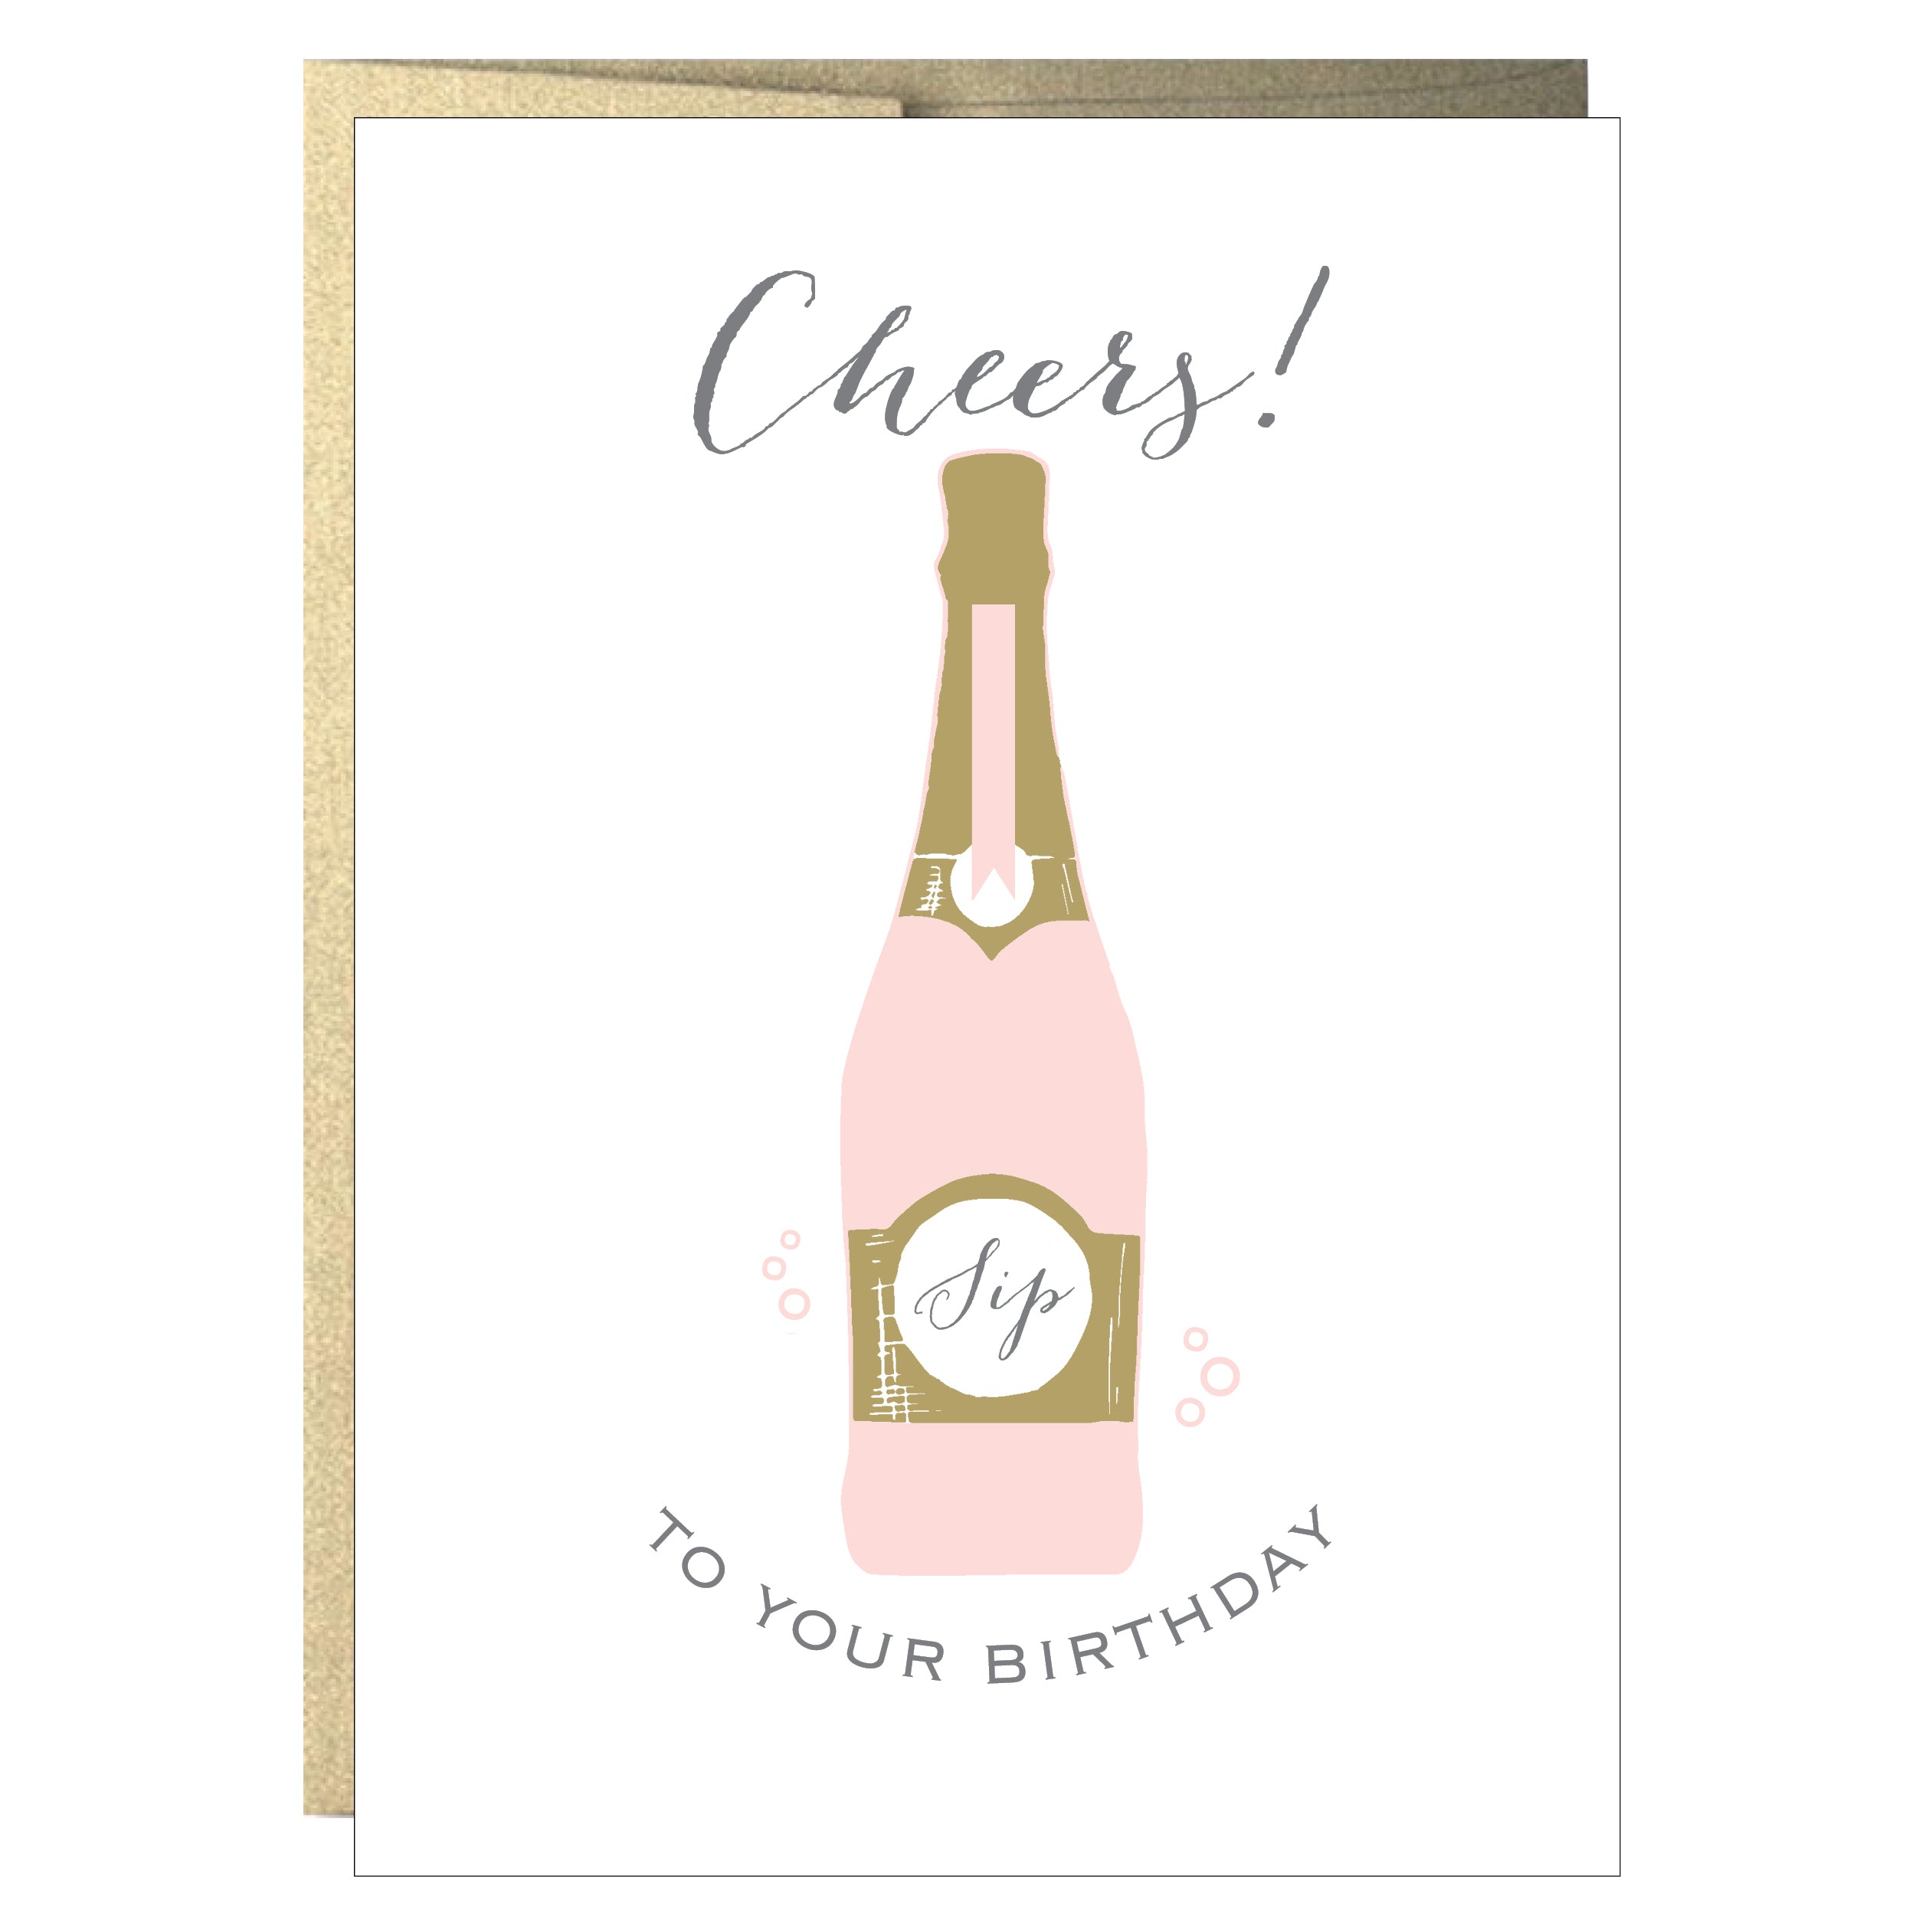 Pop the Celebration with Mini Champagne Bottles